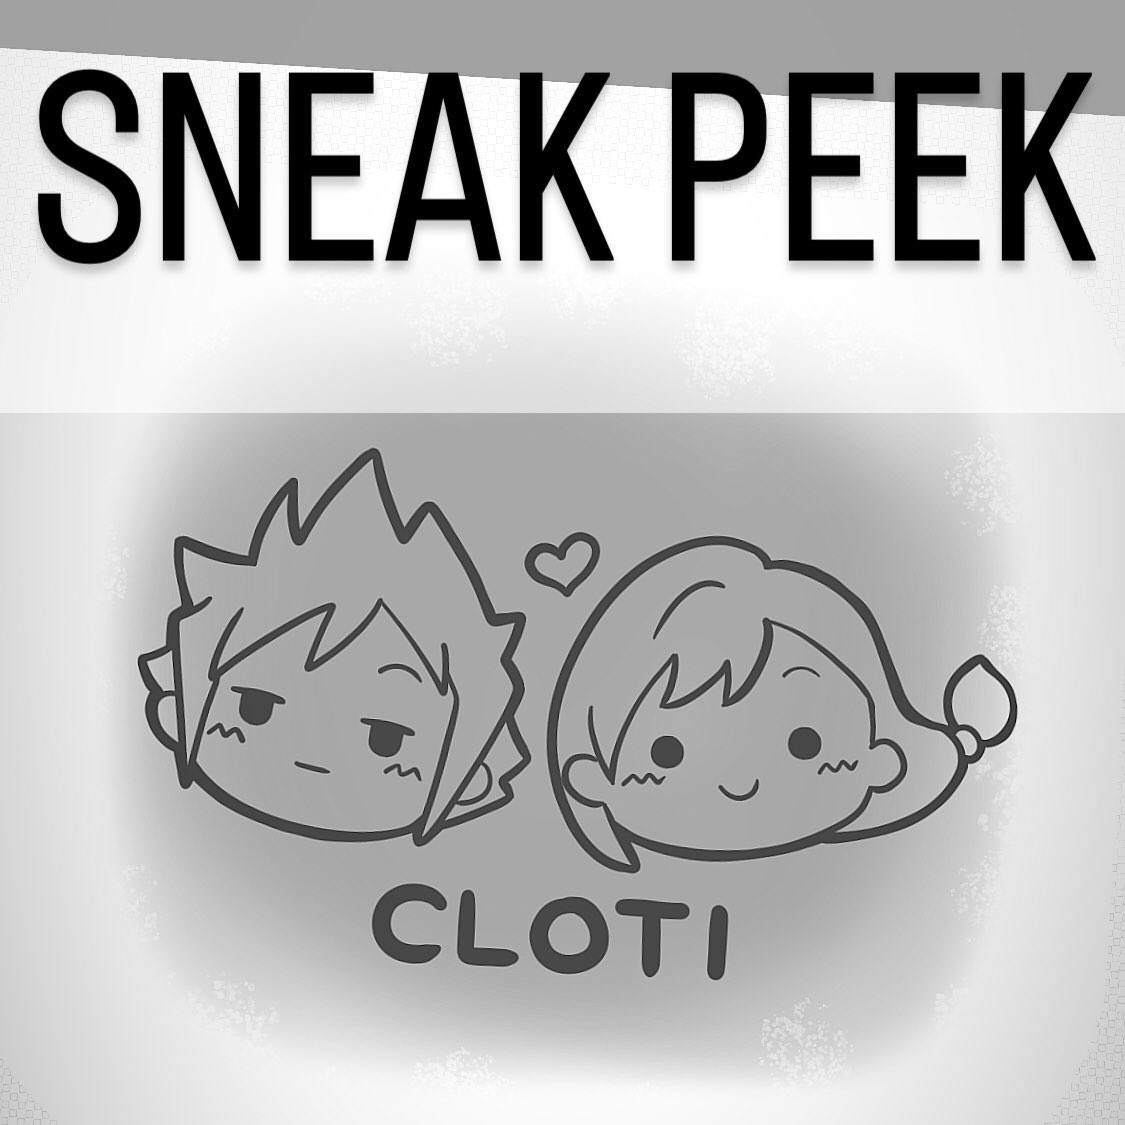 Planned to be available on Oct-Dec ish in 2023 💁🏻‍♀️❤️
#cloti #sneakpeek #fanmerchandise